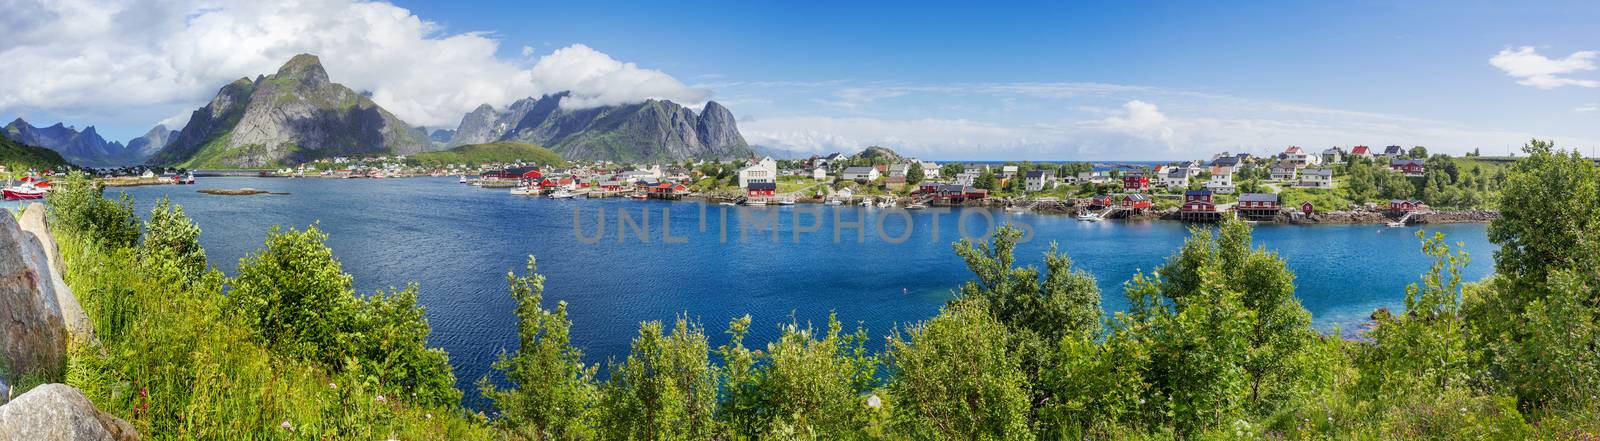 Beautiful scandinavian landscape with mountains and fjords. Panorama view of Reine village on Lofoten islands, Norway.